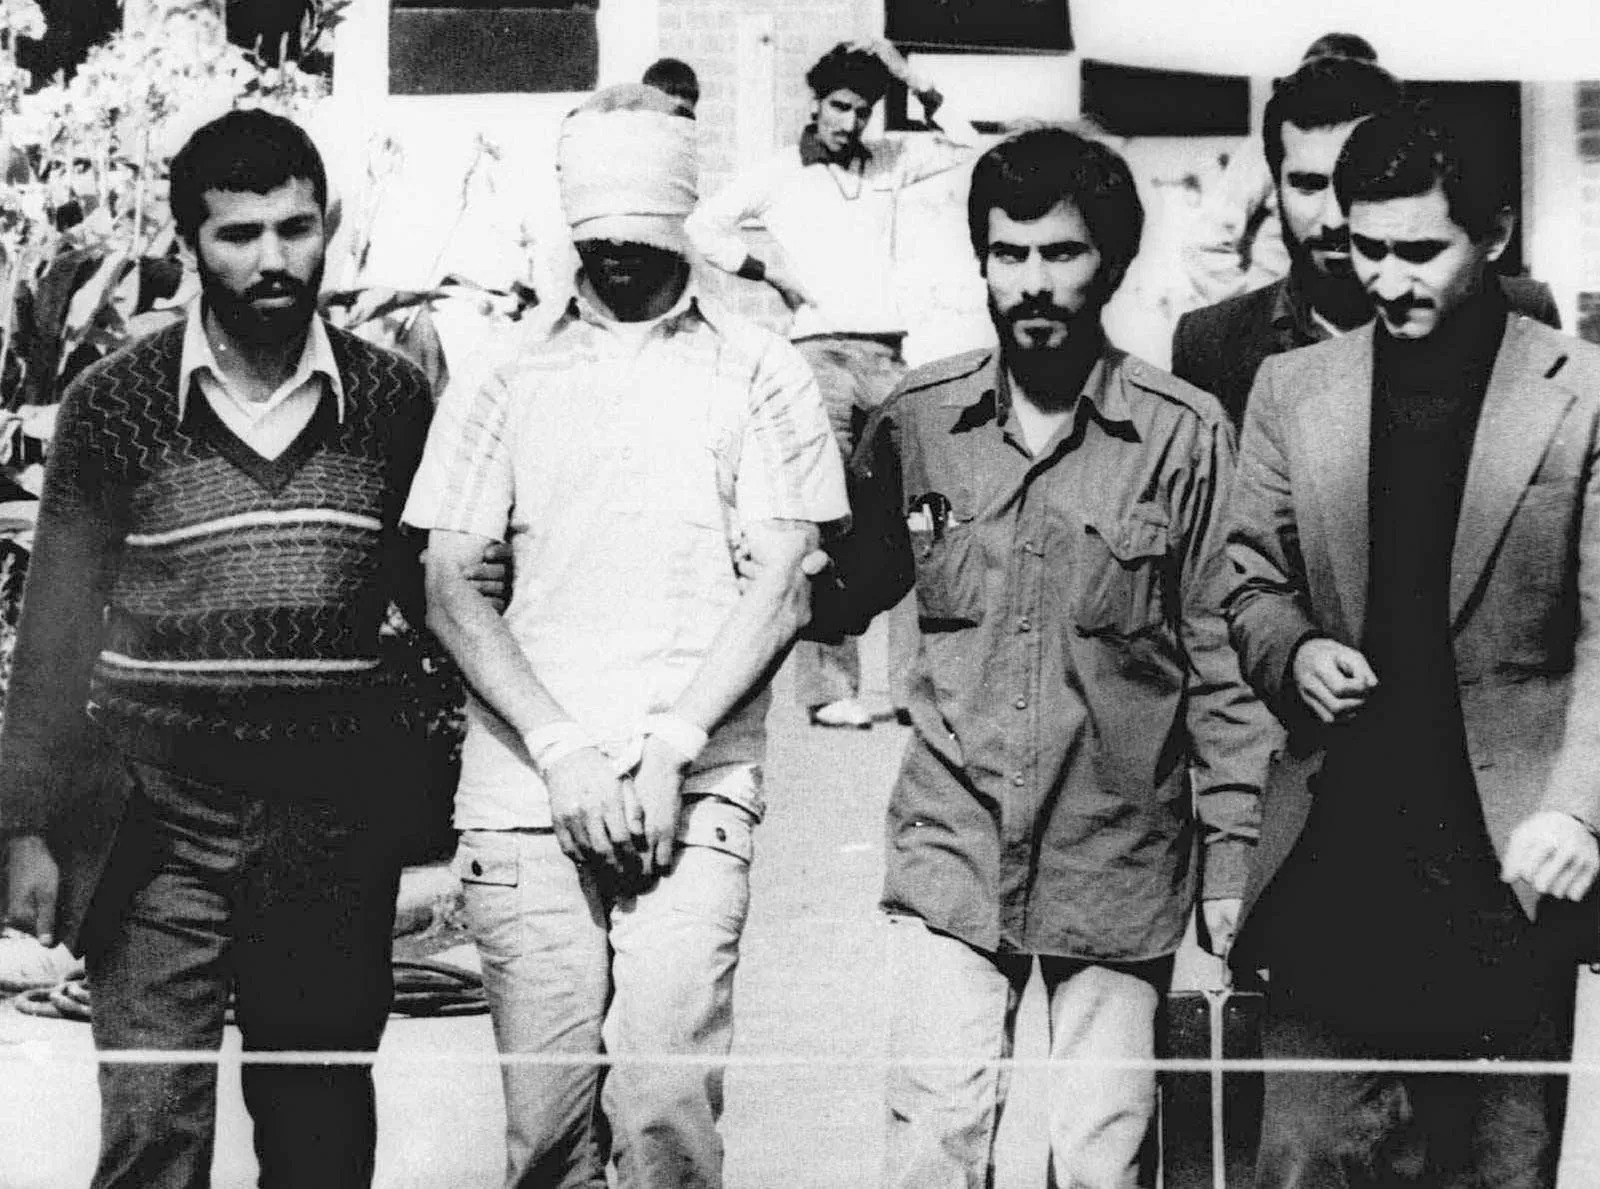 Challenge Yourself in This General Knowledge Quiz — Do You Have What It Takes to Score 75%? Iranian hostage crisis